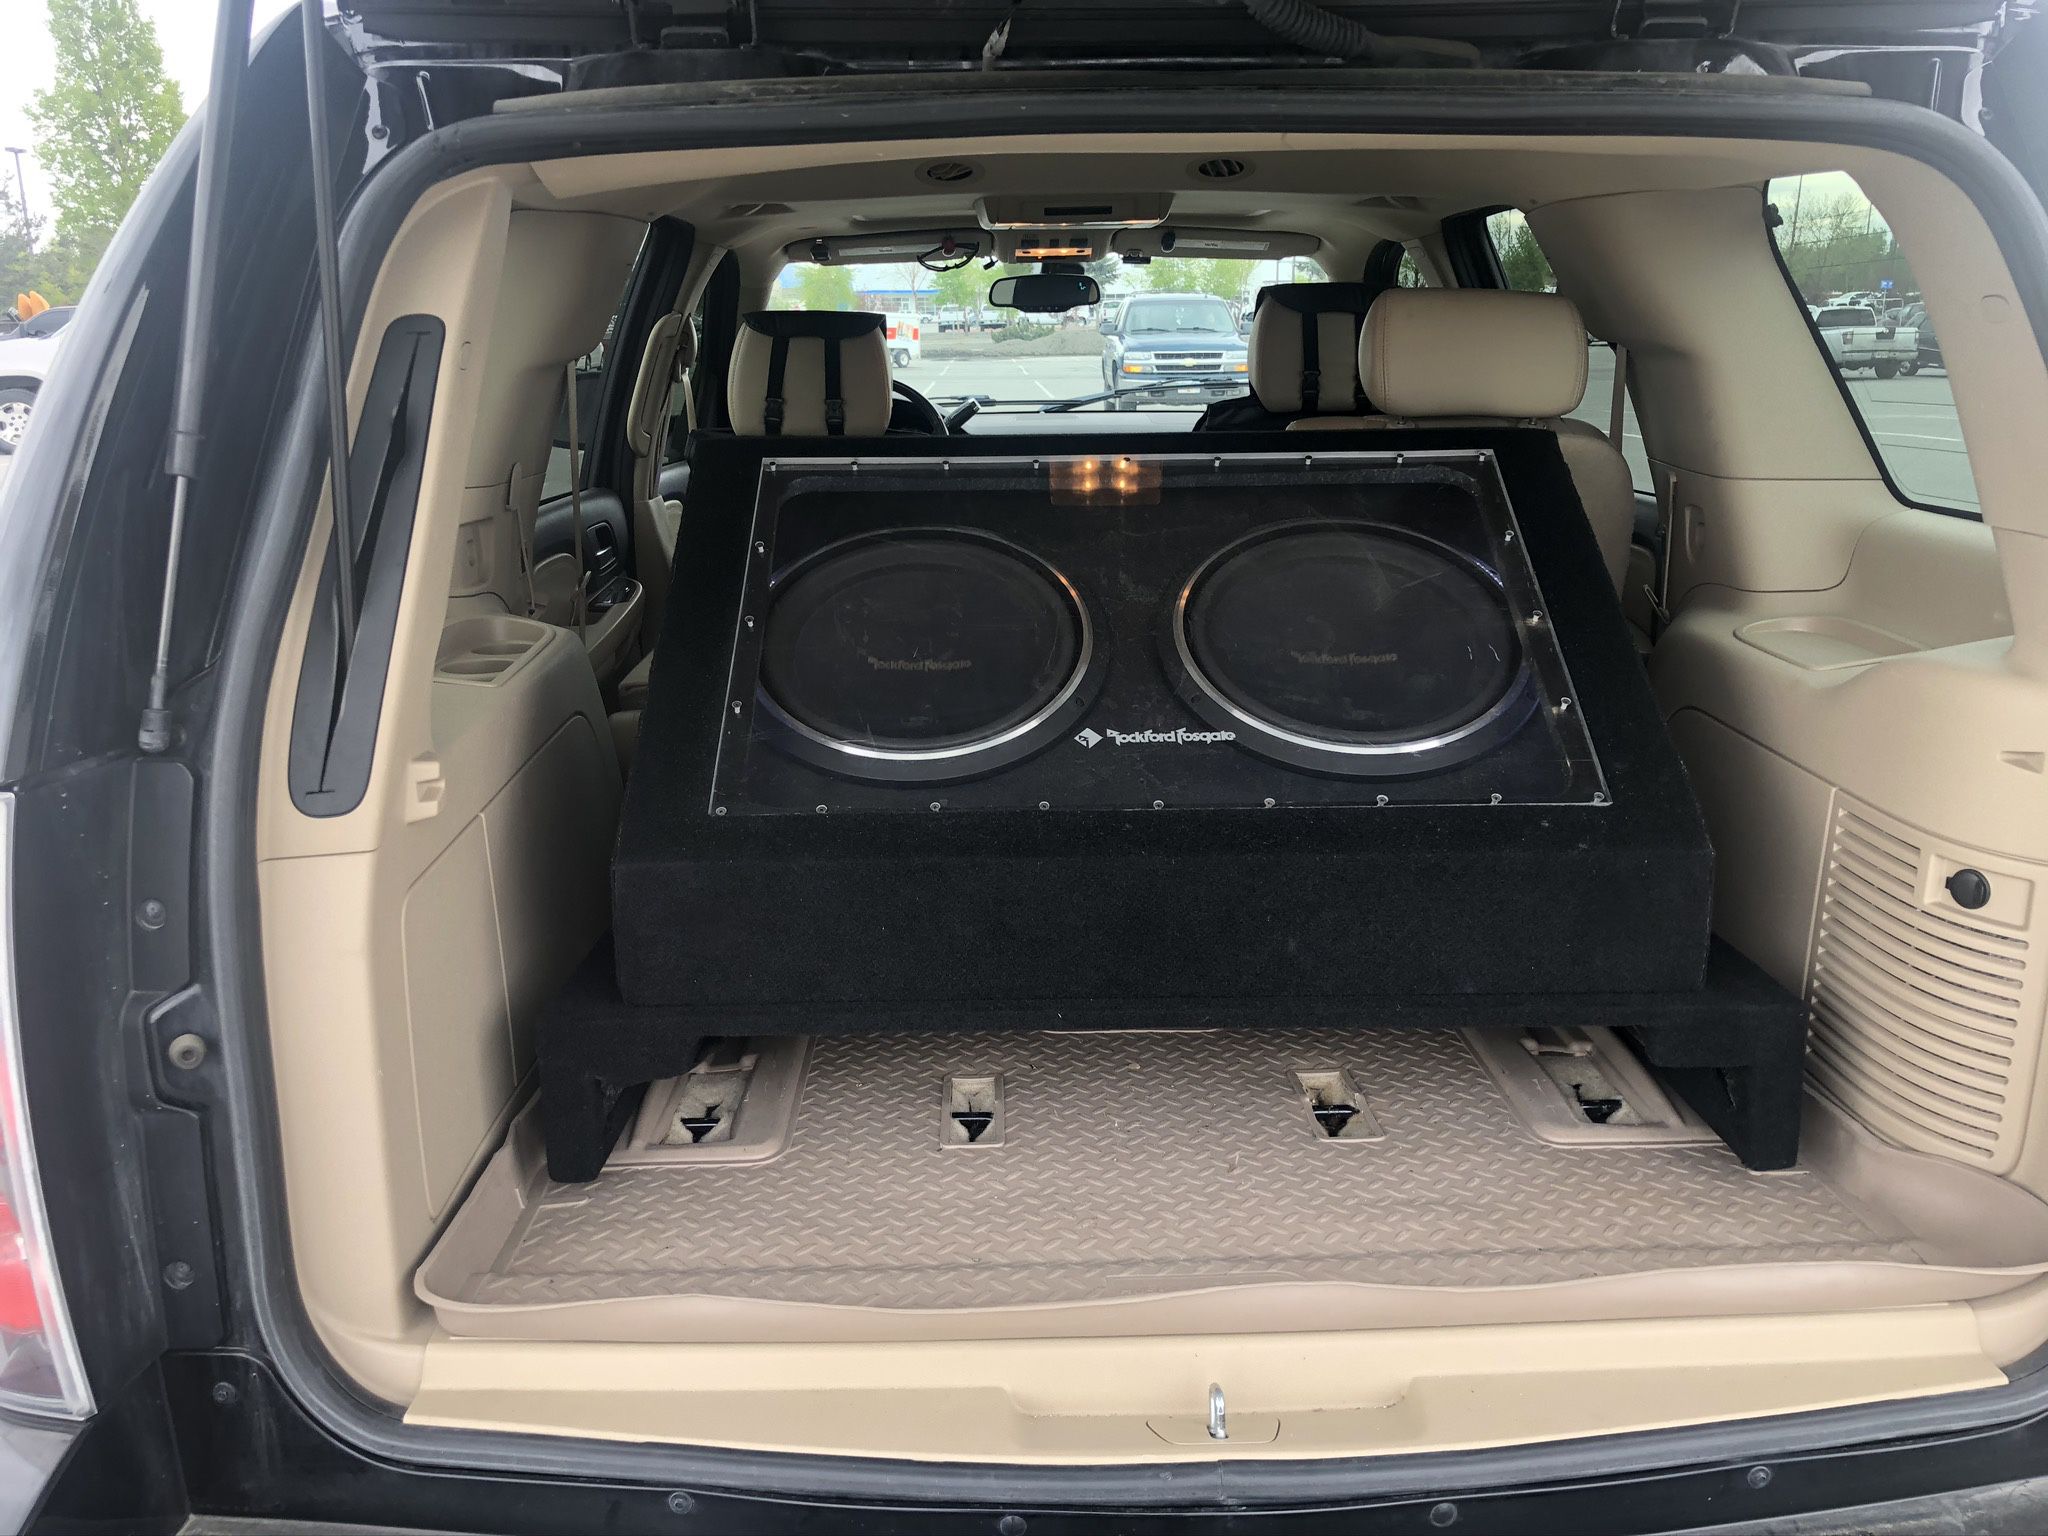 Two Rockford Fosgate P3 15’s In Coustome Lit Box Plexiglass Front 6inches Of Storage Under Black Carpet 